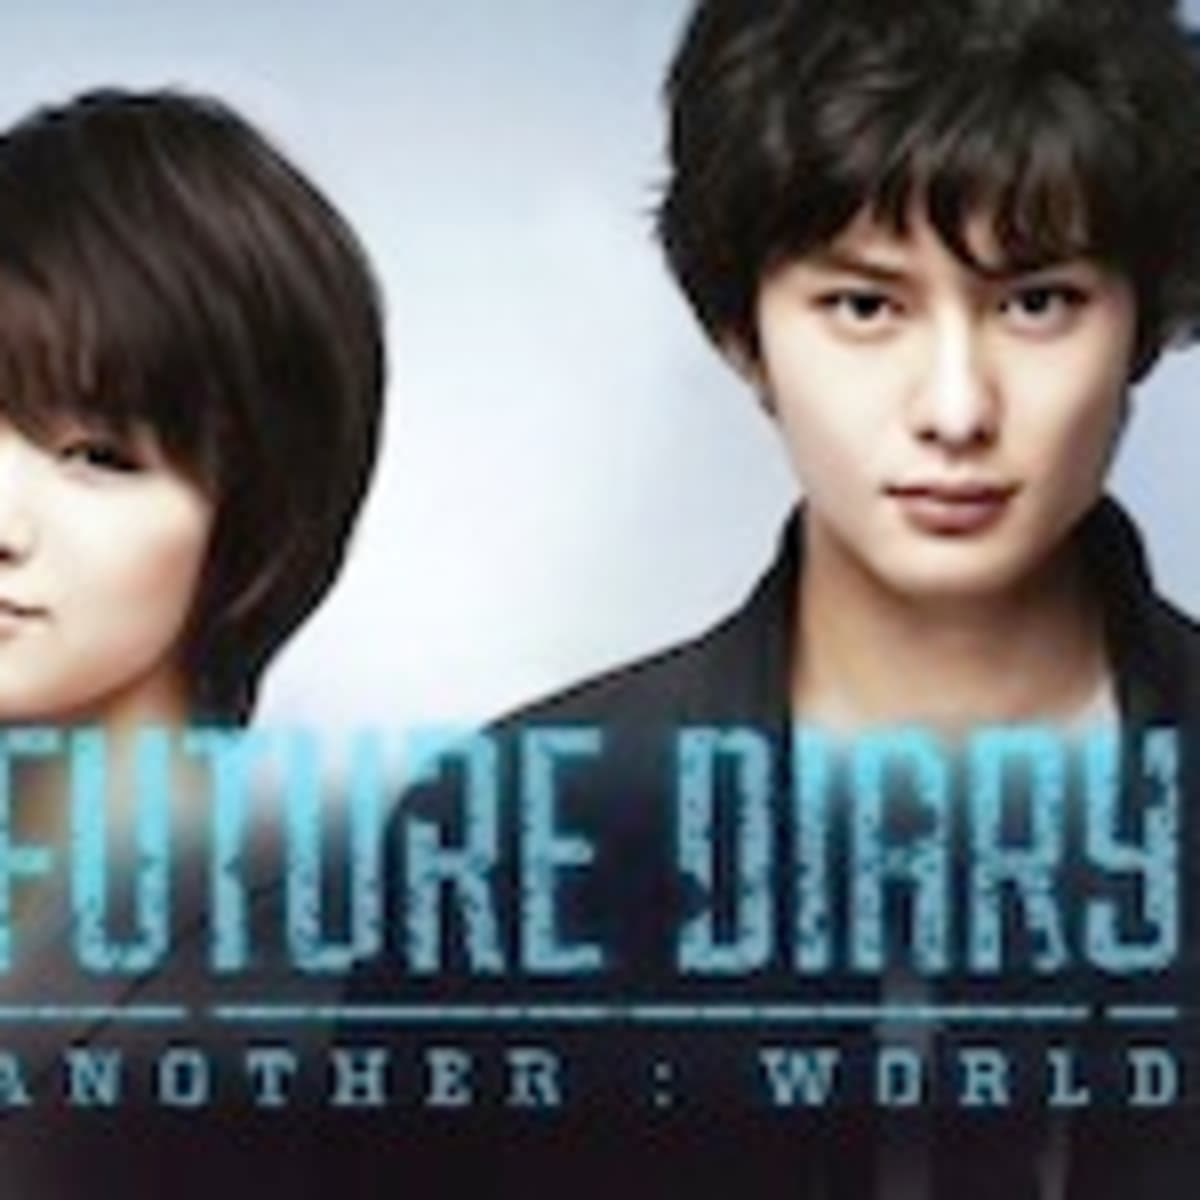 Review of Japanese Drama Series 'Future Diary - Another World' - HubPages